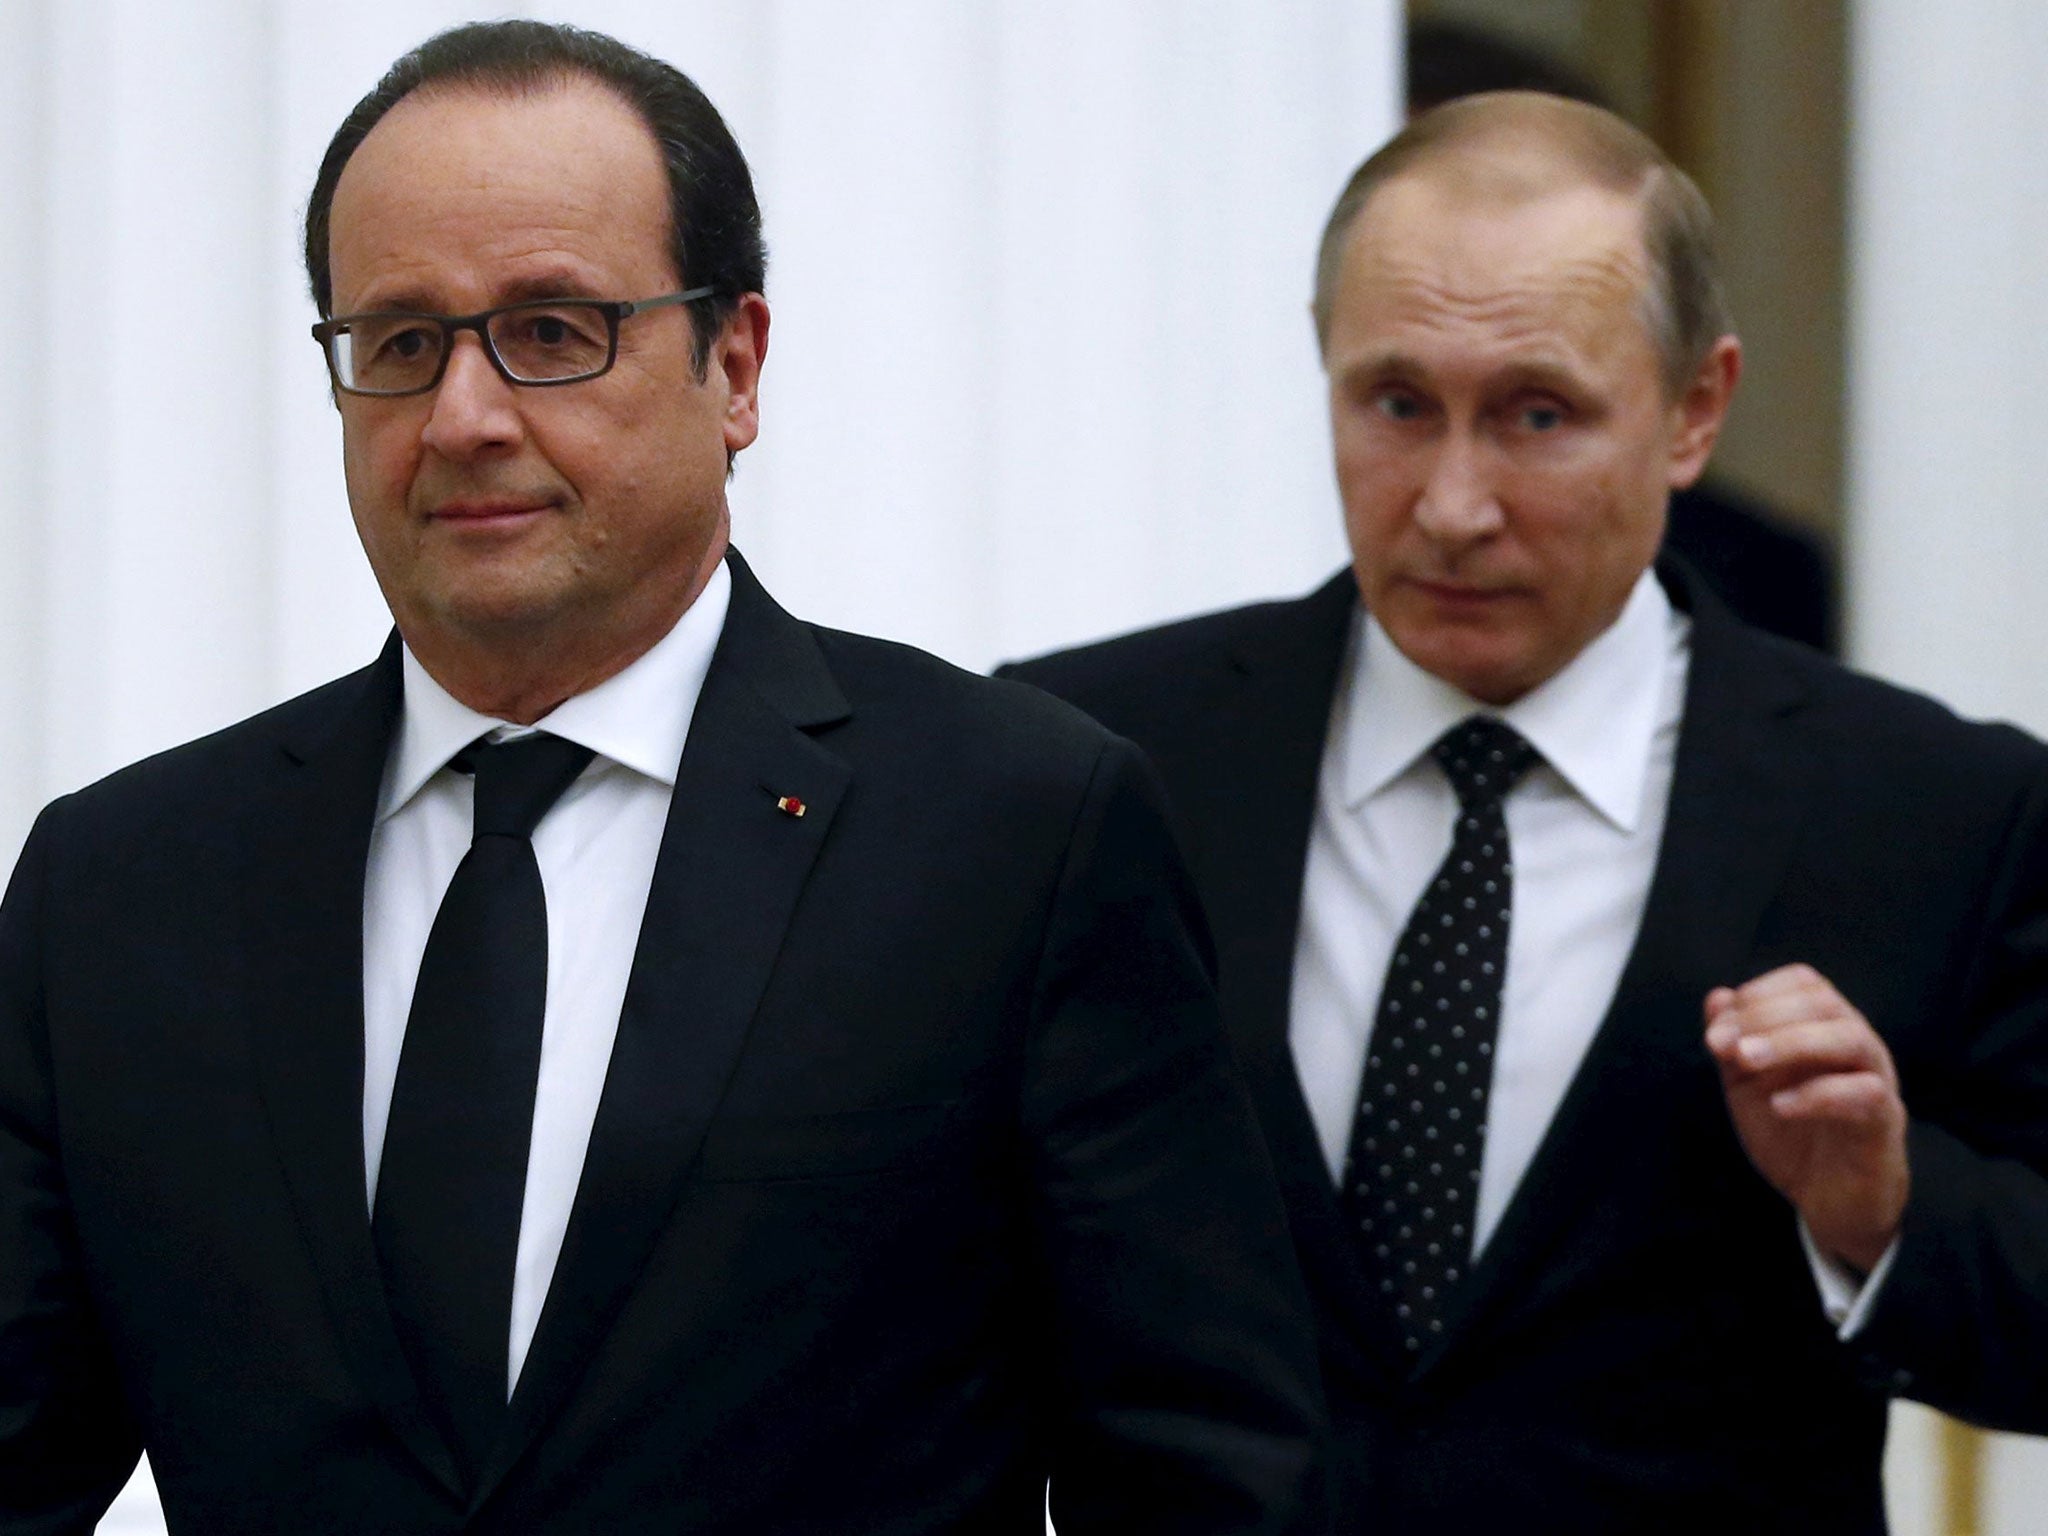 Russia's President Vladimir Putin (R) and his French counterpart Francois Hollande walk to attend a news conference after a meeting at the Kremlin in Moscow, Russia, November 26, 2015.